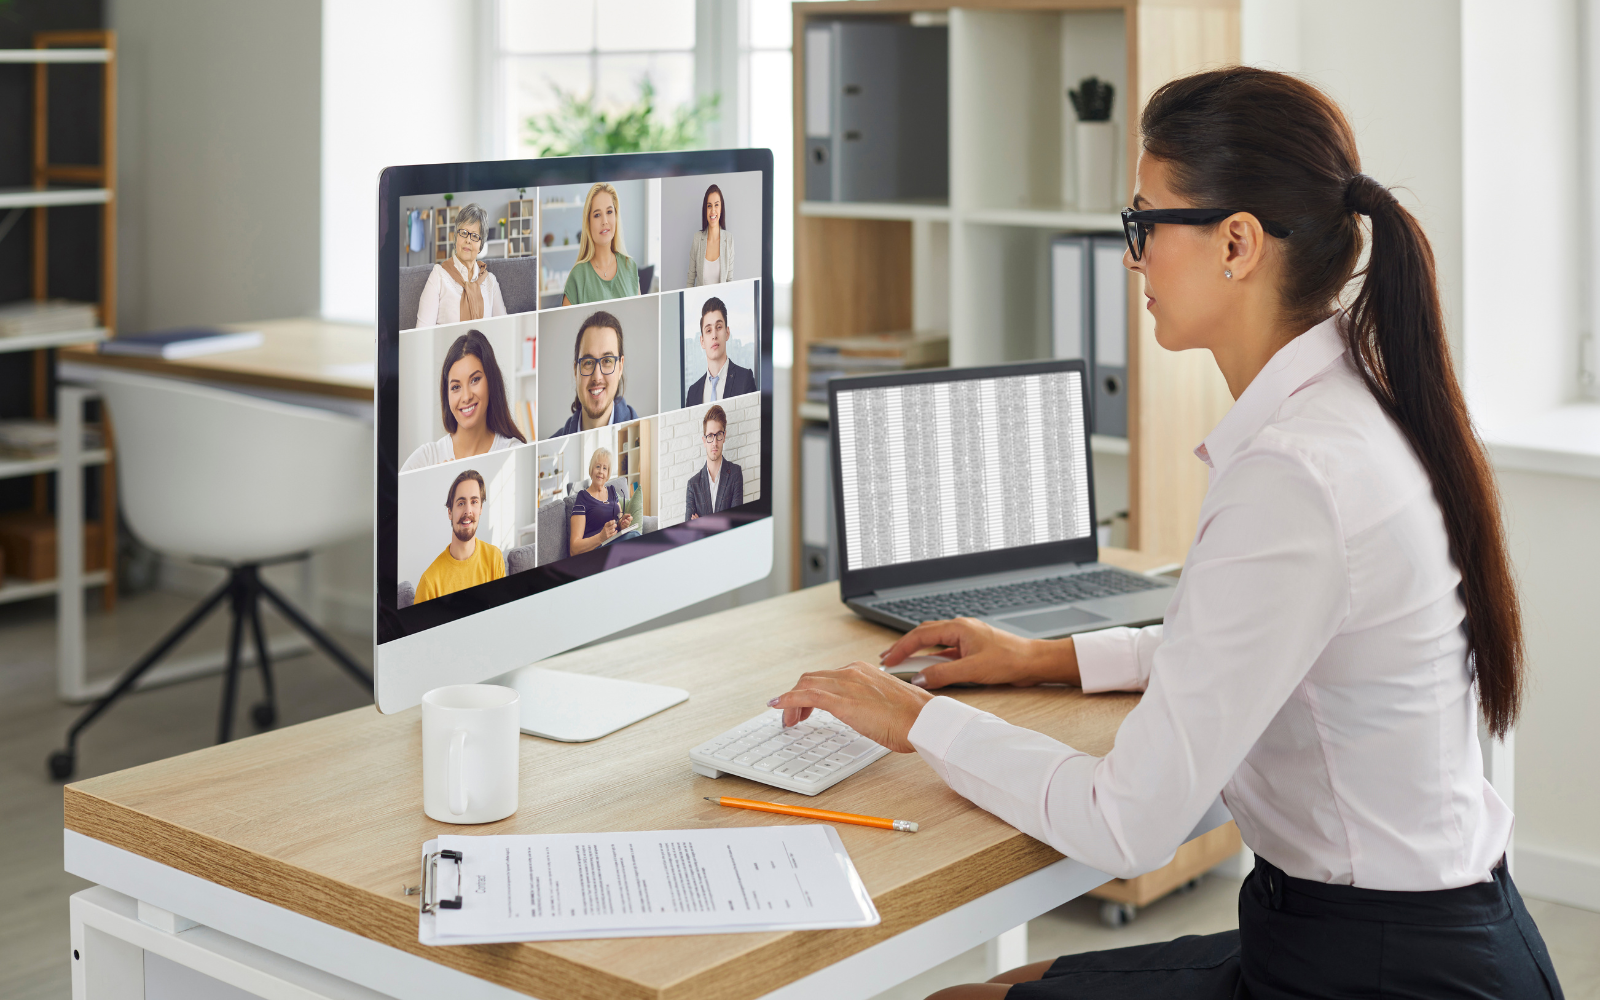 How to Choose the Best Lighting for Video Conferencing